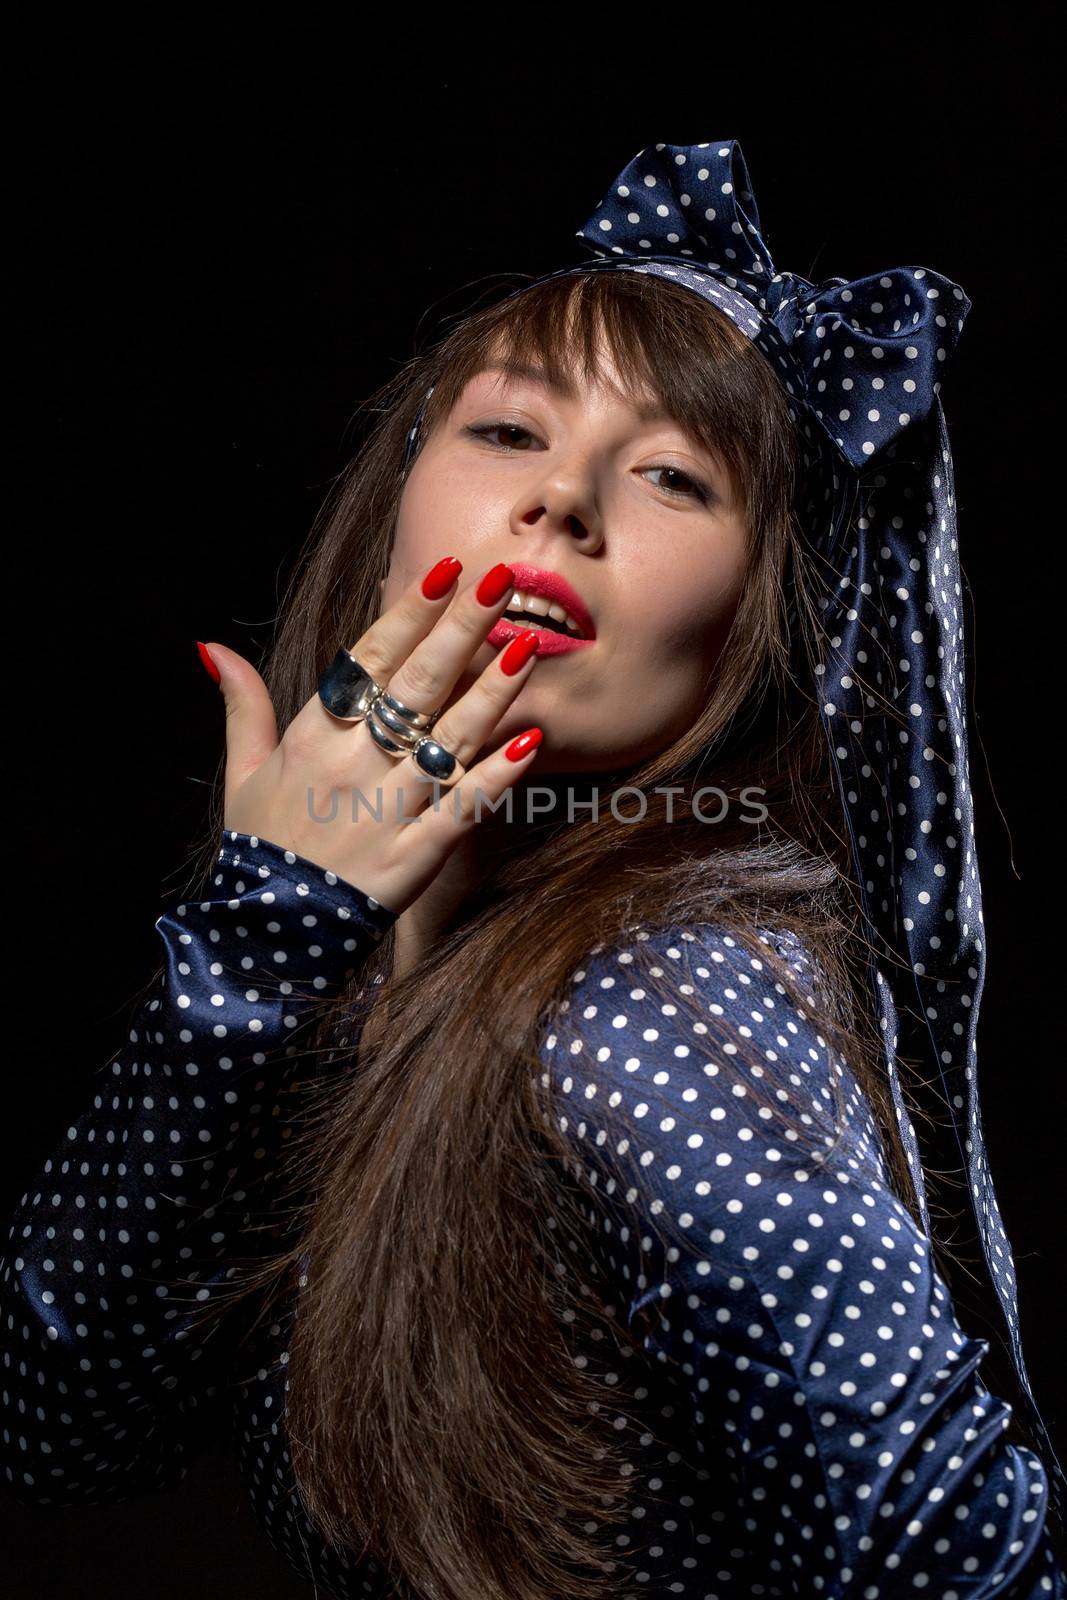 Elegant sensual woman with long brunette hair wearing stylish polka dot evening dress applying red lipstick to her lips against a dark background